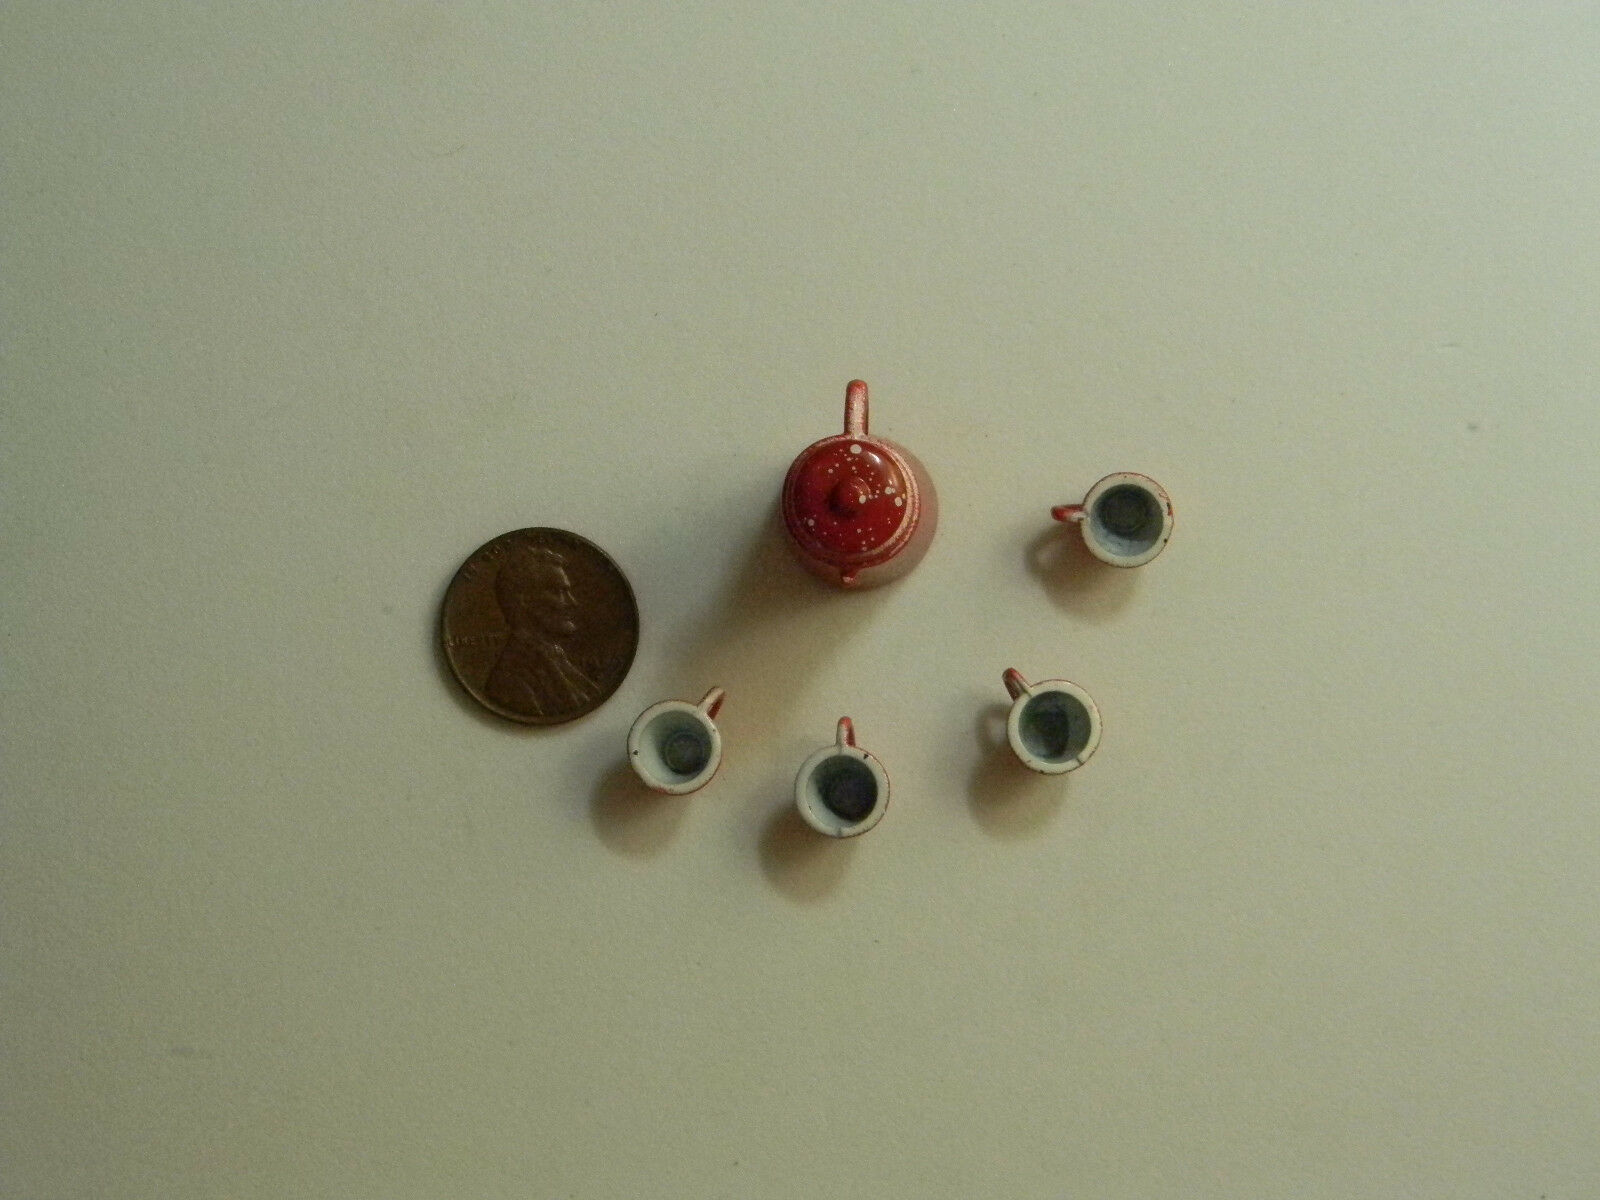 Miniature Coffee Set In Red, Pot & 4 Cups, 1:12 Scale